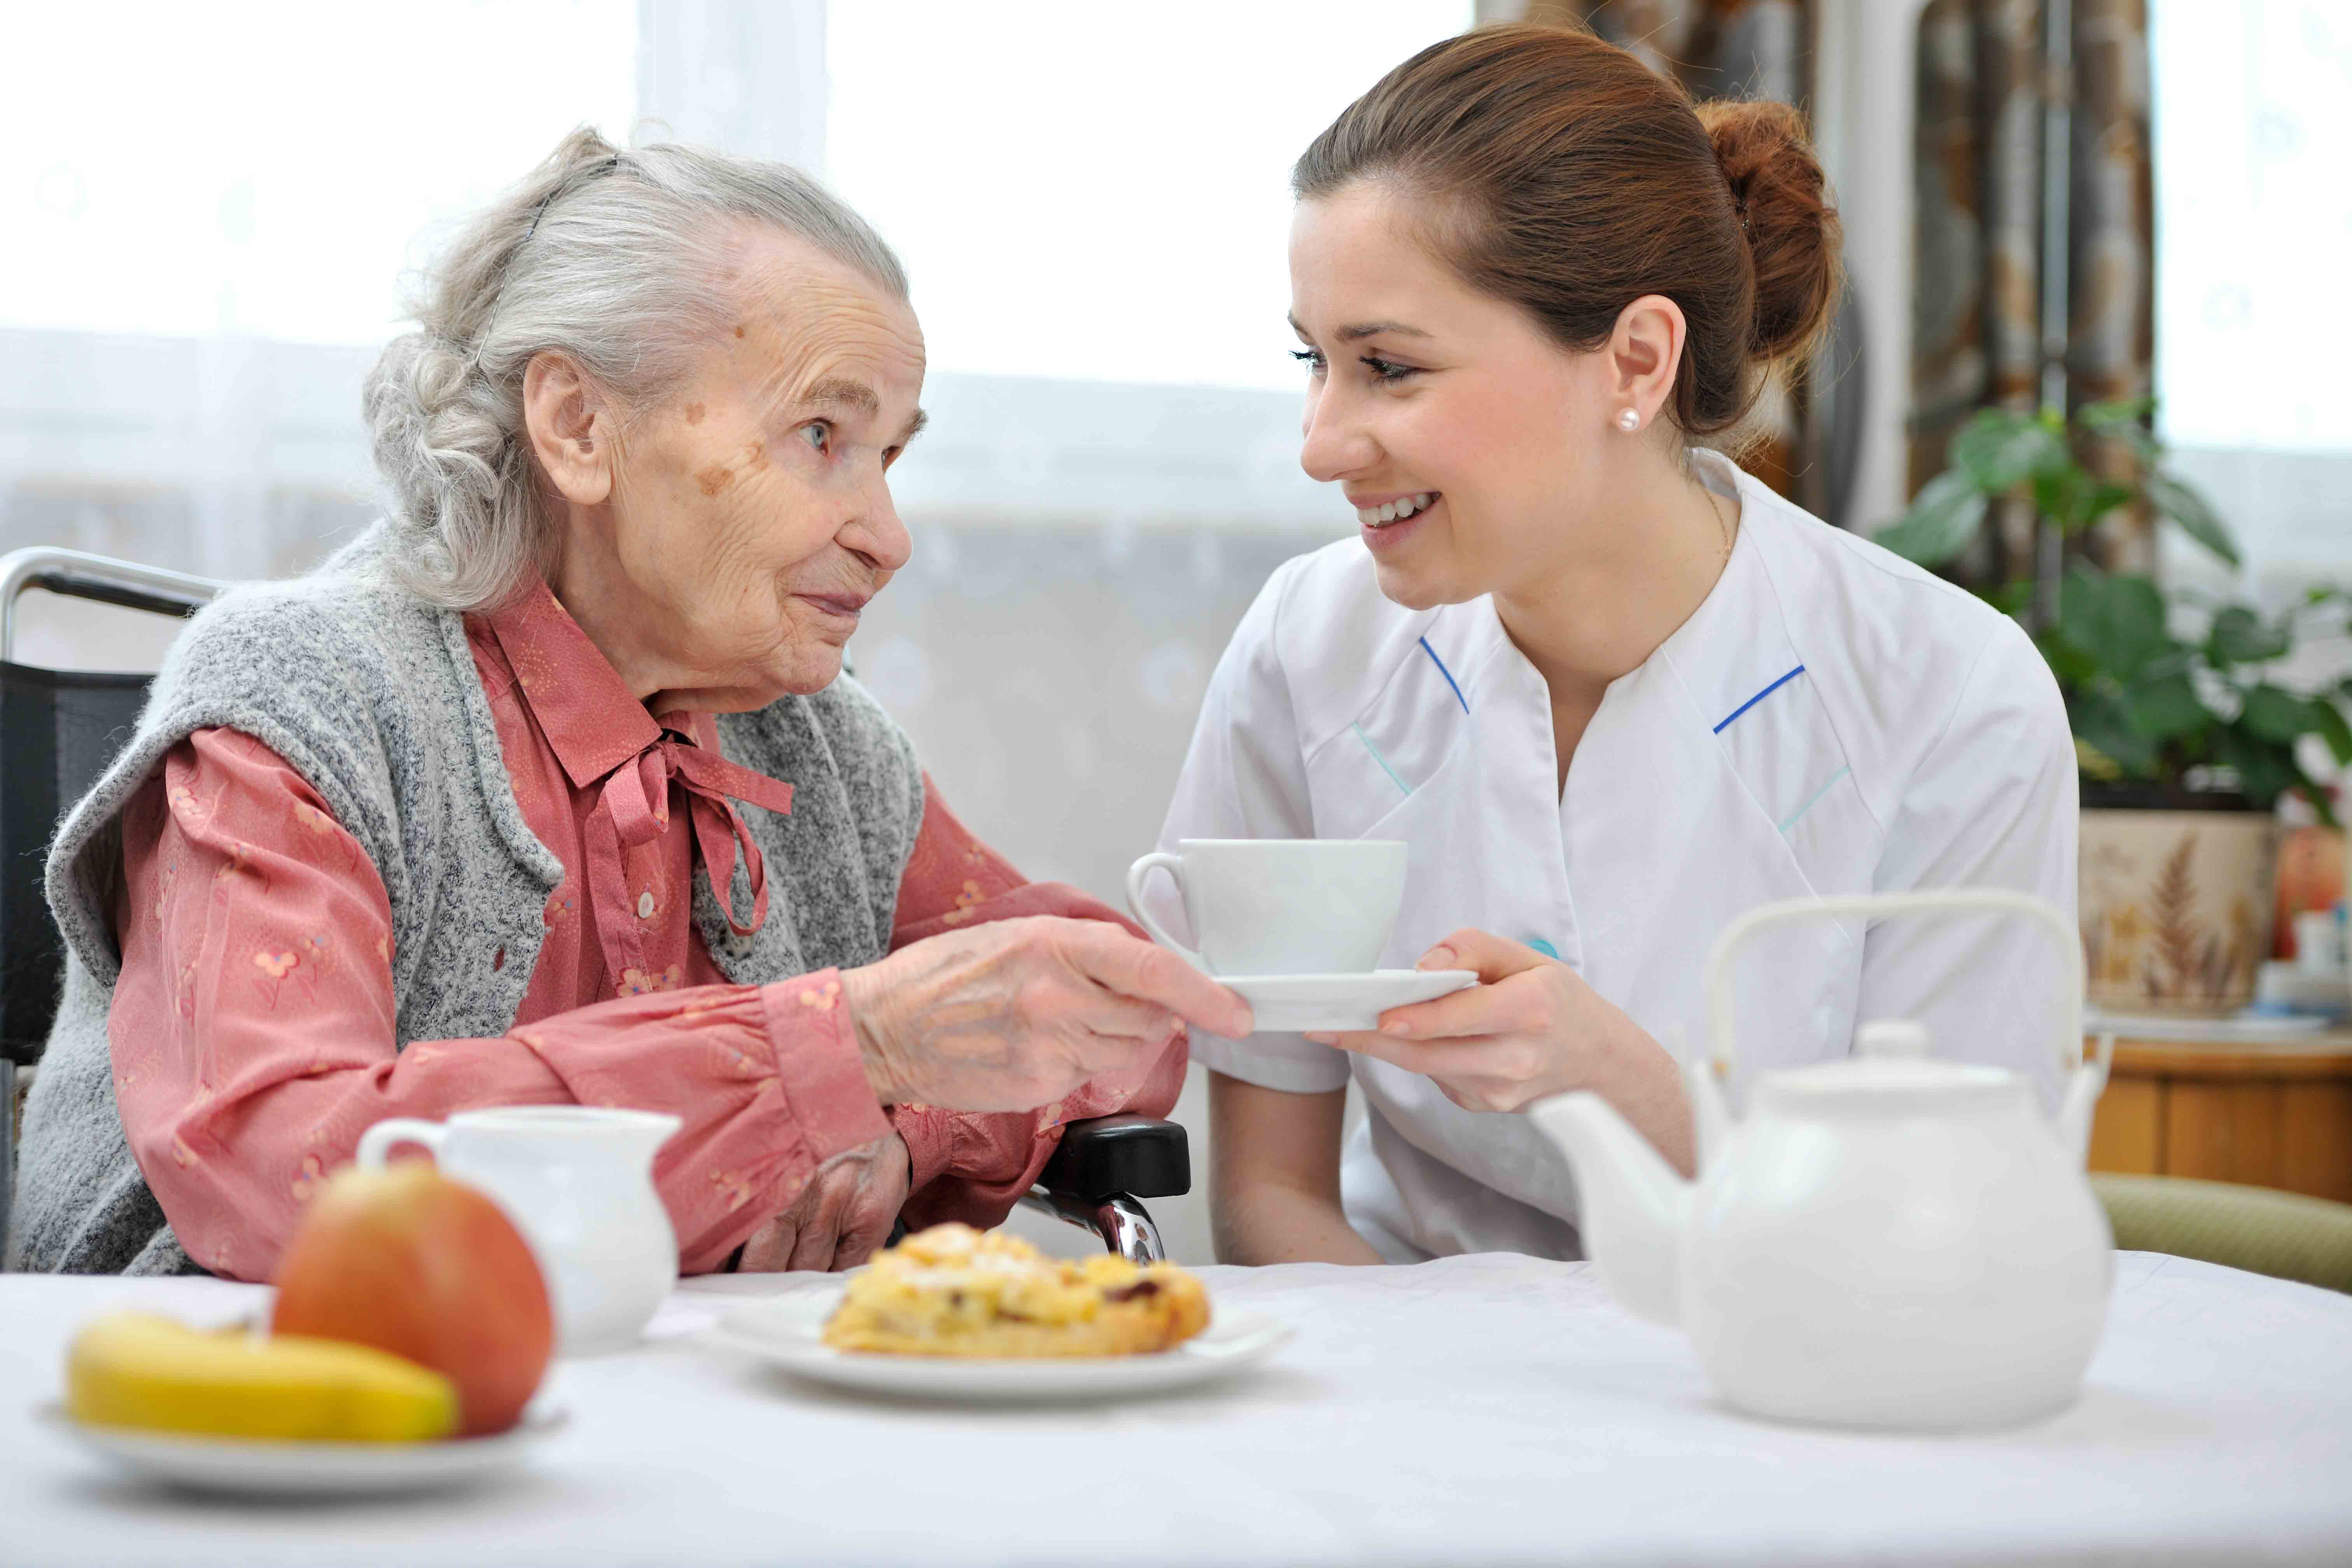 Los Angeles County In Home Care